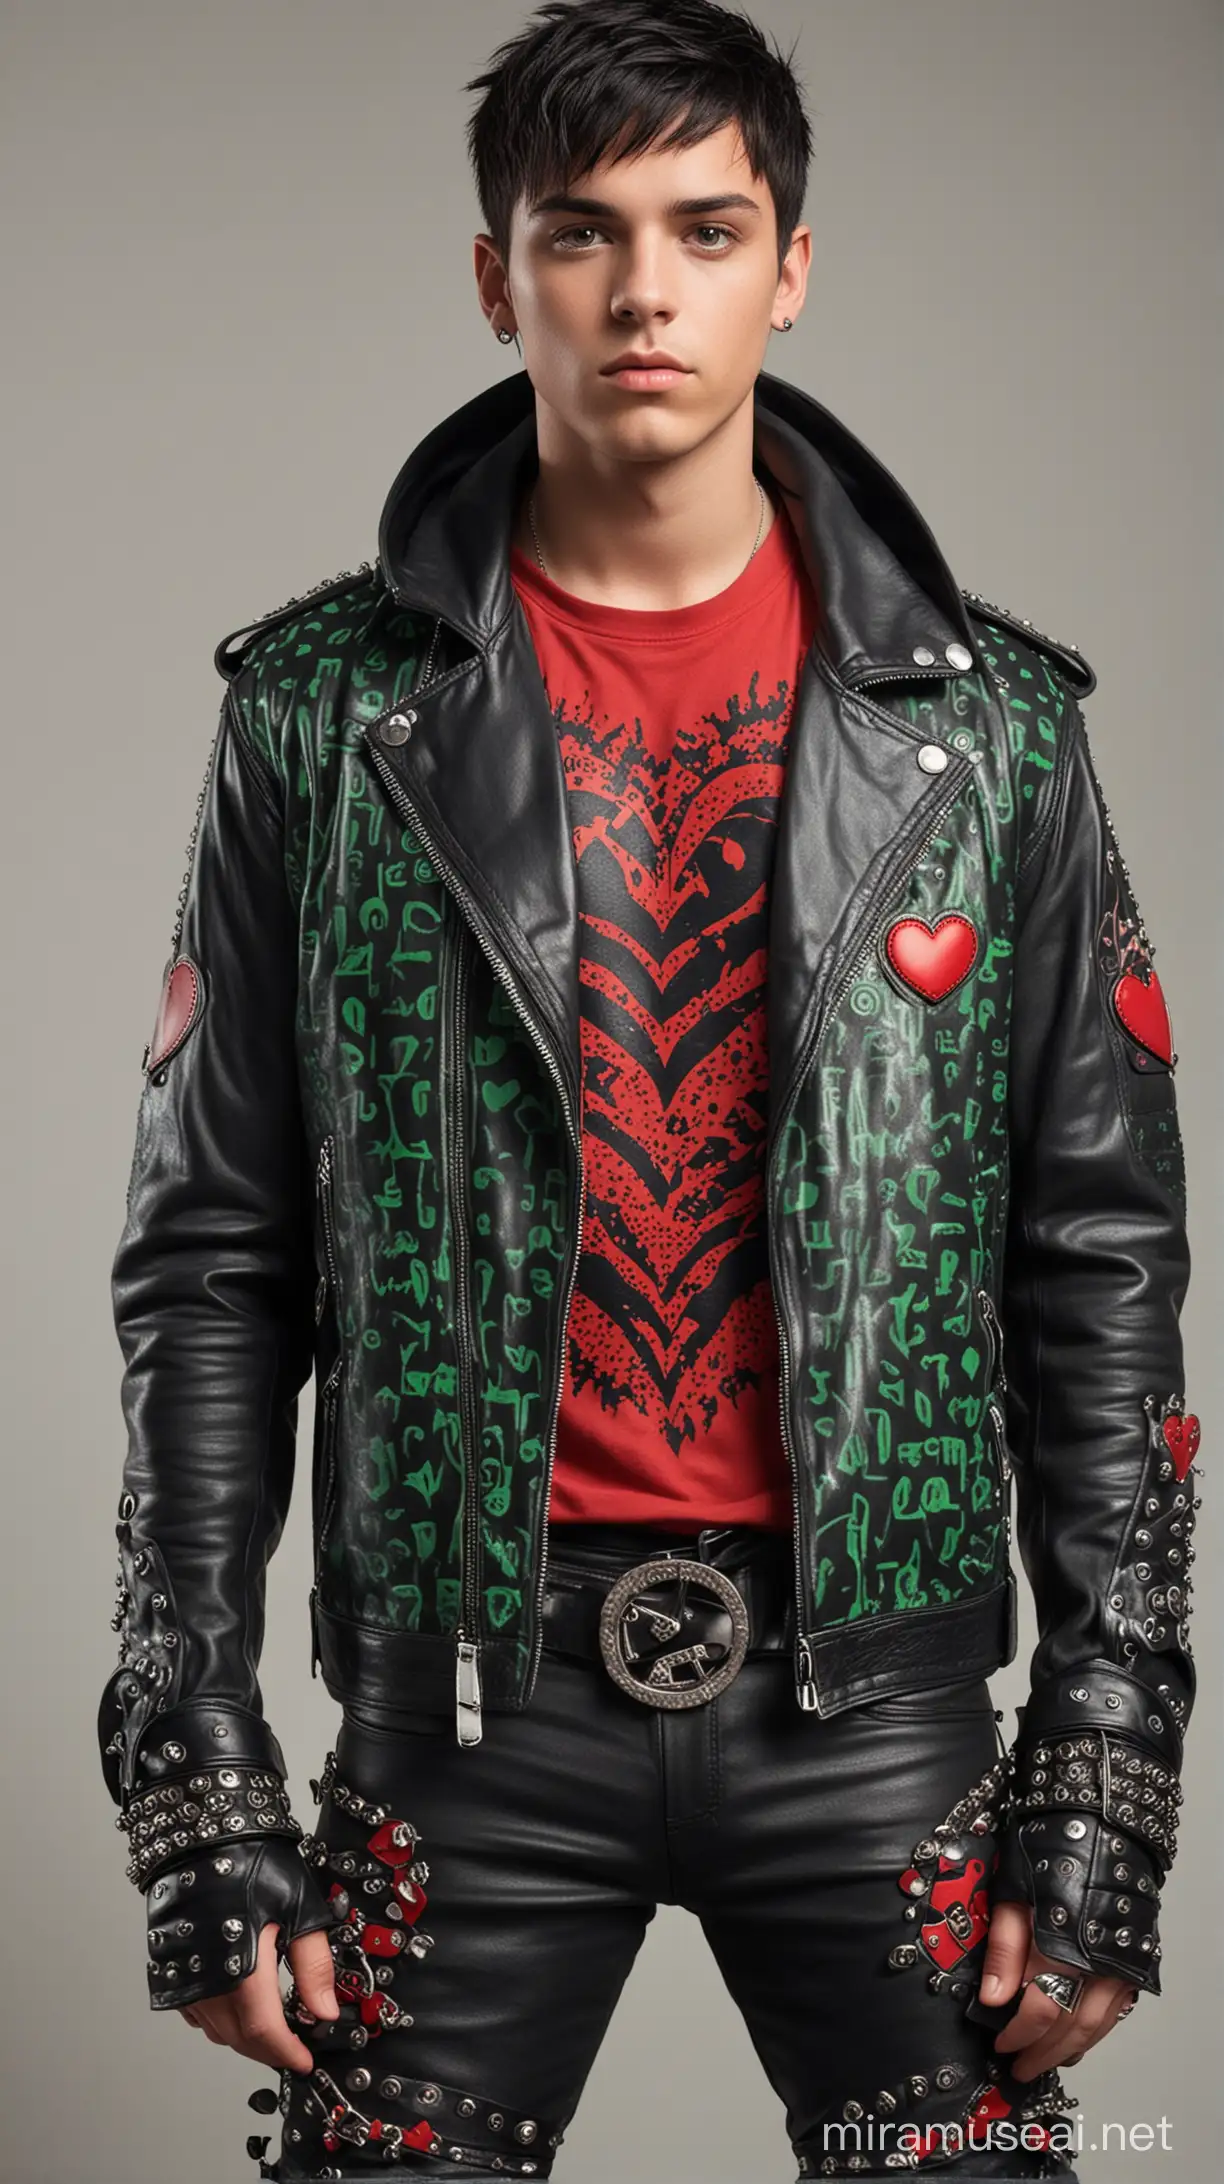 Stylish Young Man with Red and Black Leather Jacket and Heart Patterns